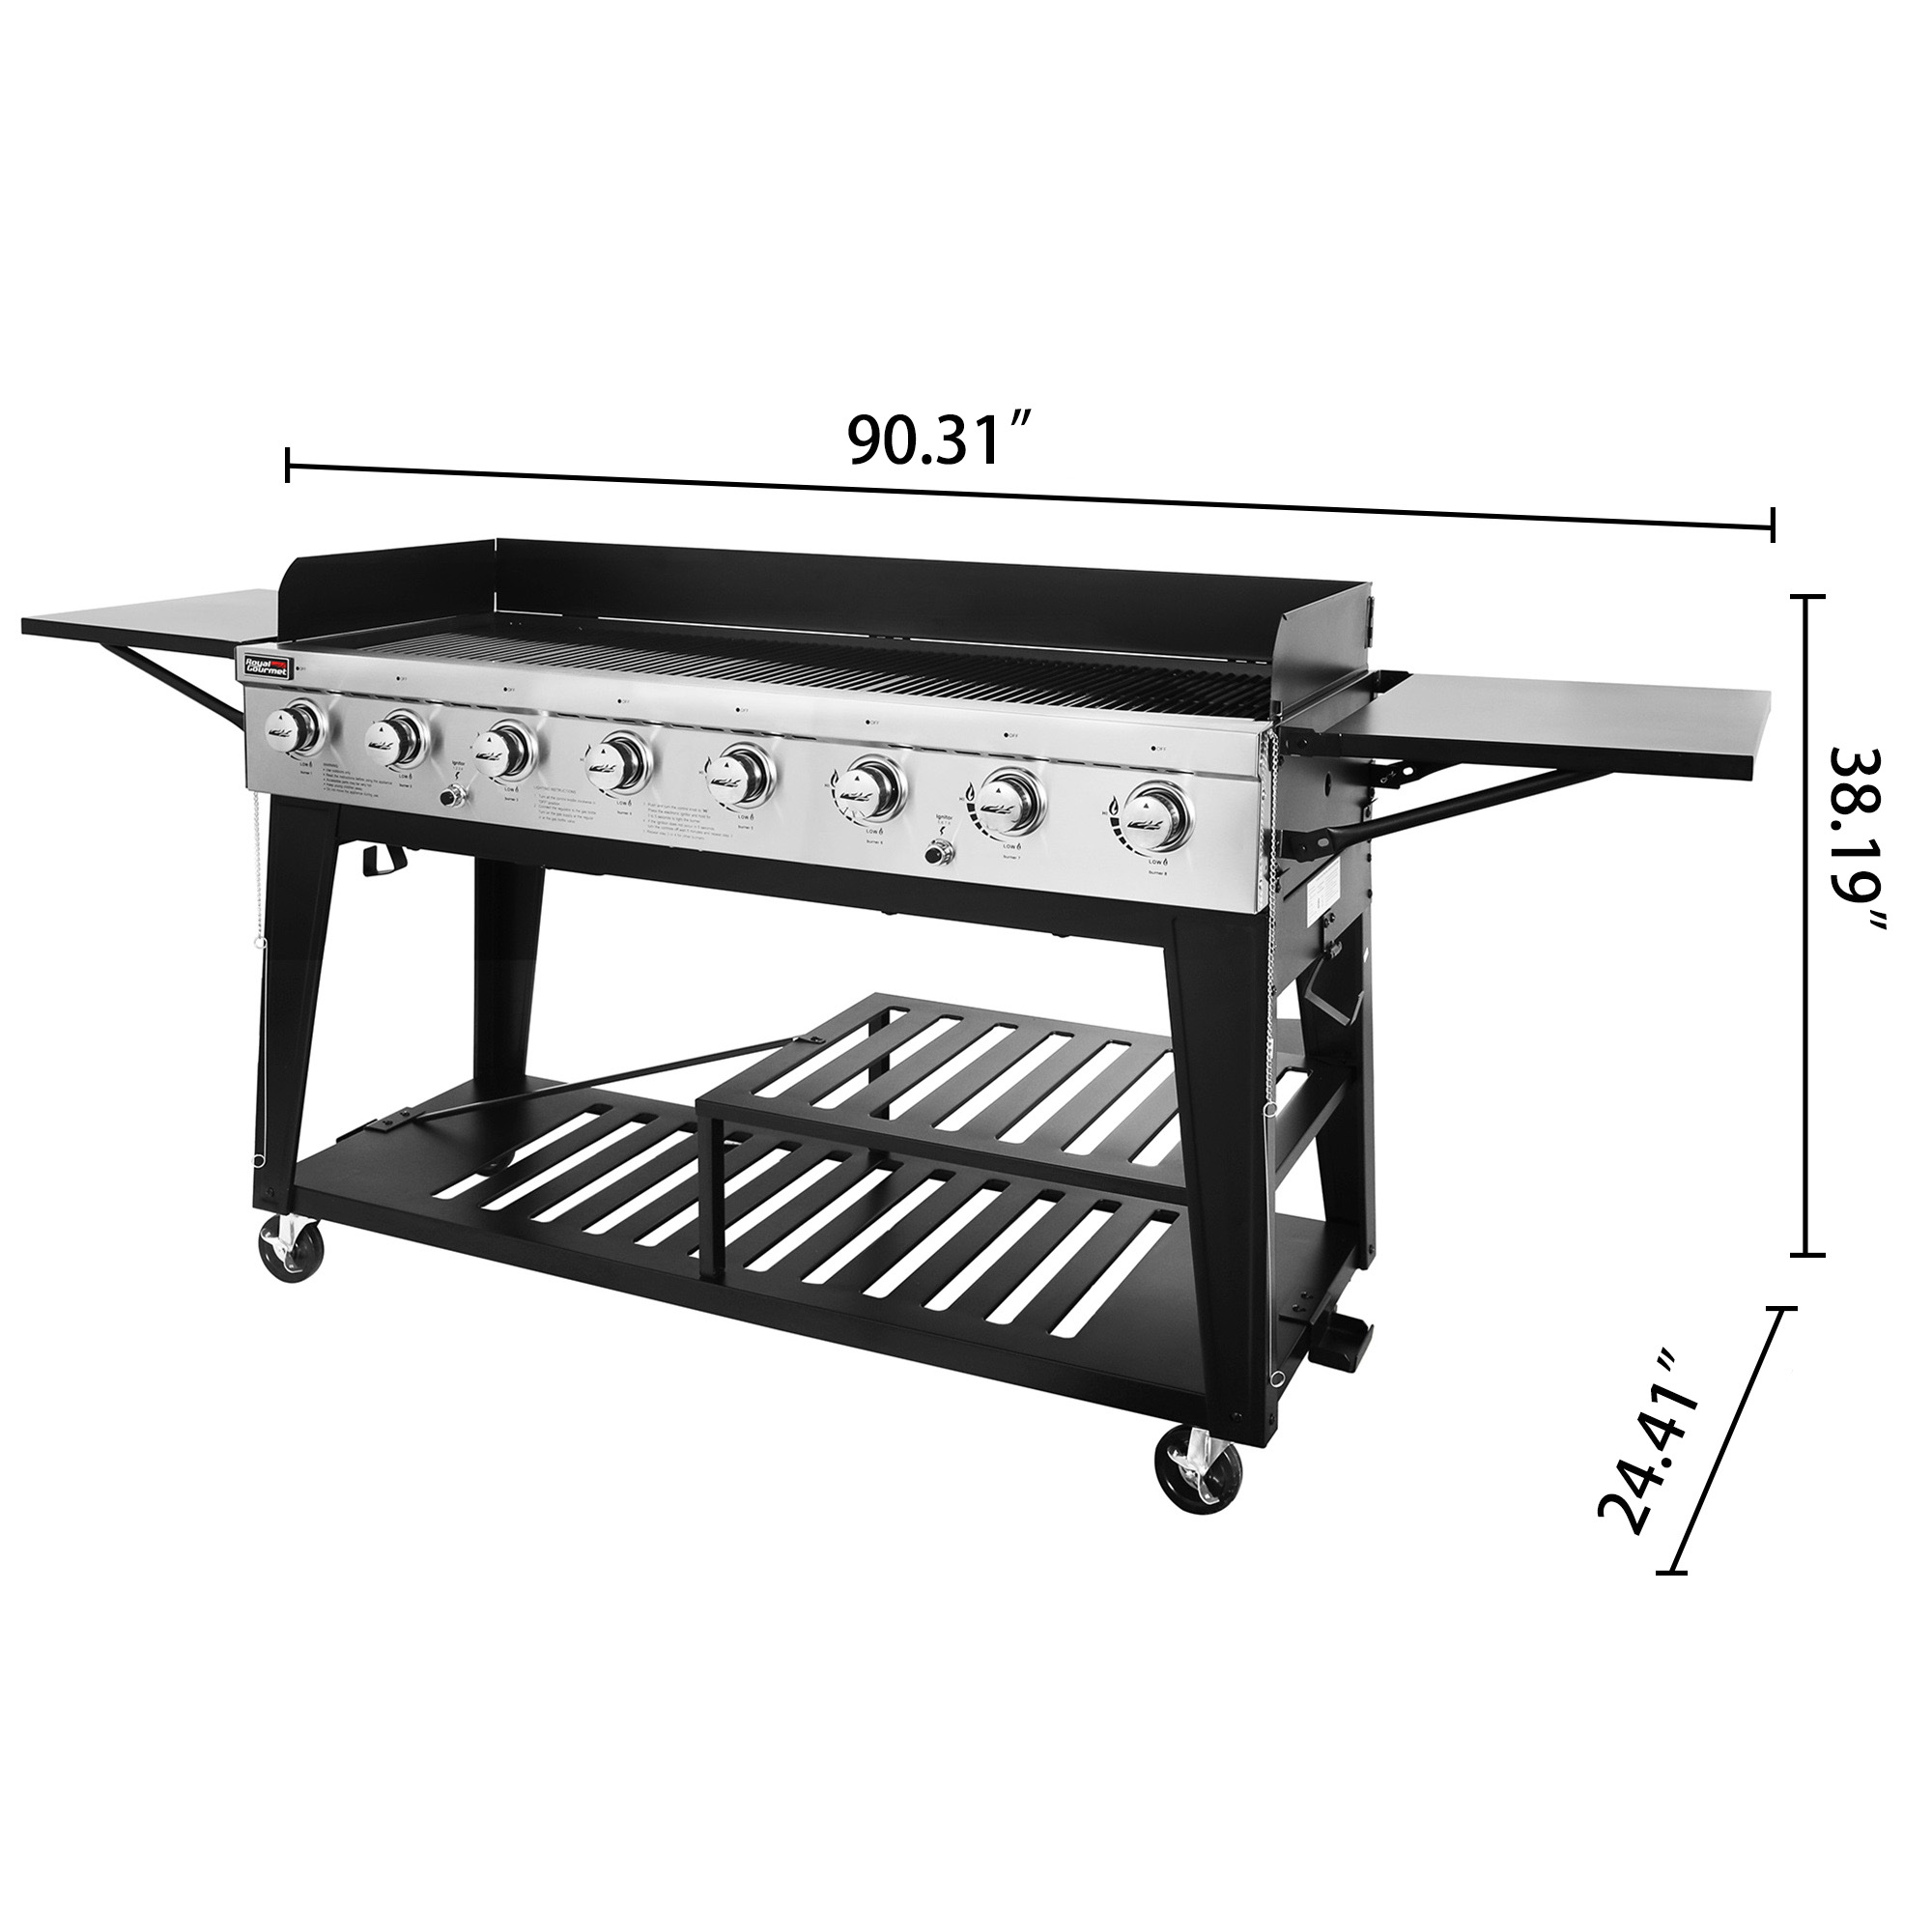 Royal Gourmet GB8001 8-Burner BBQ Gas Propane Grill Outdoor Large Party - image 5 of 12